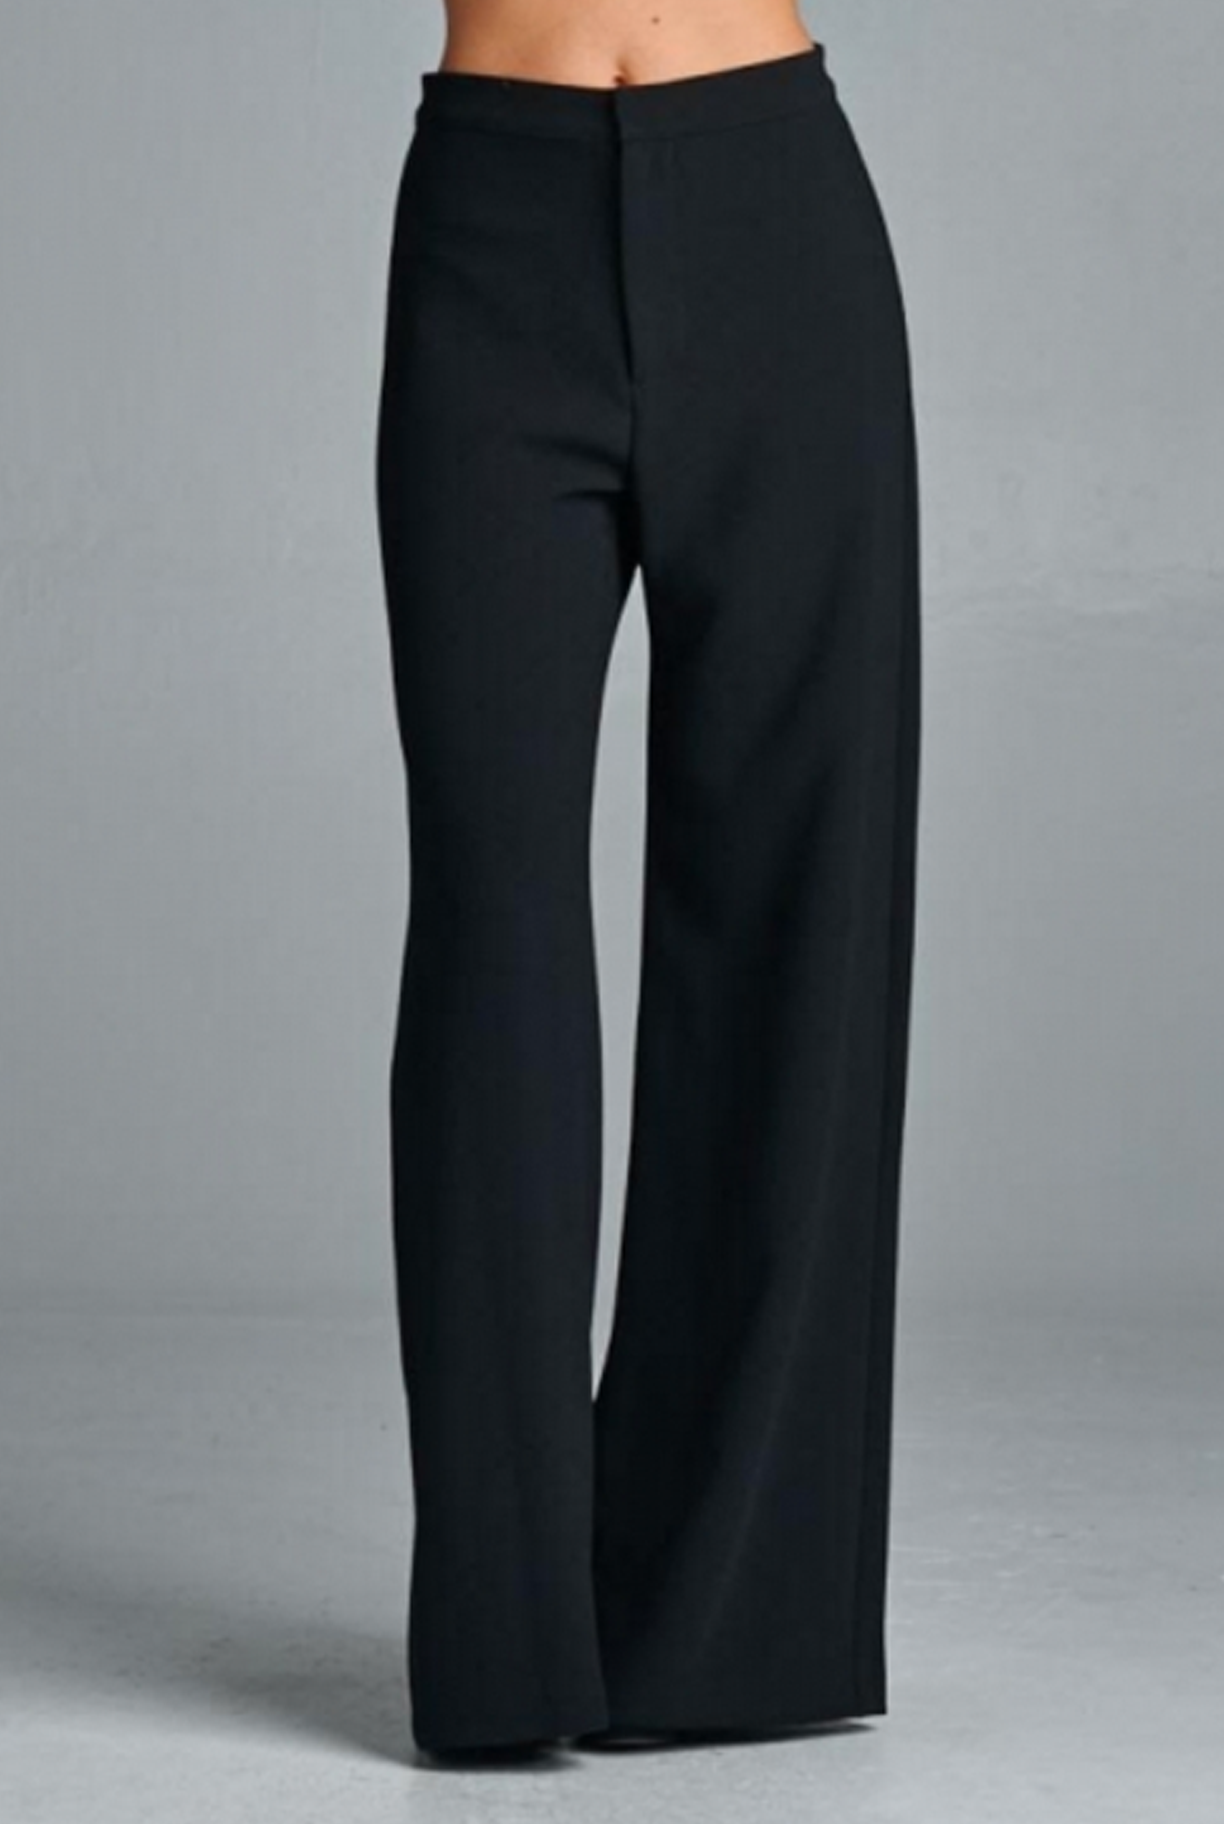 'Chartered Accounts' Women's Chic & Classic Styled Wide Leg Black Pants ...